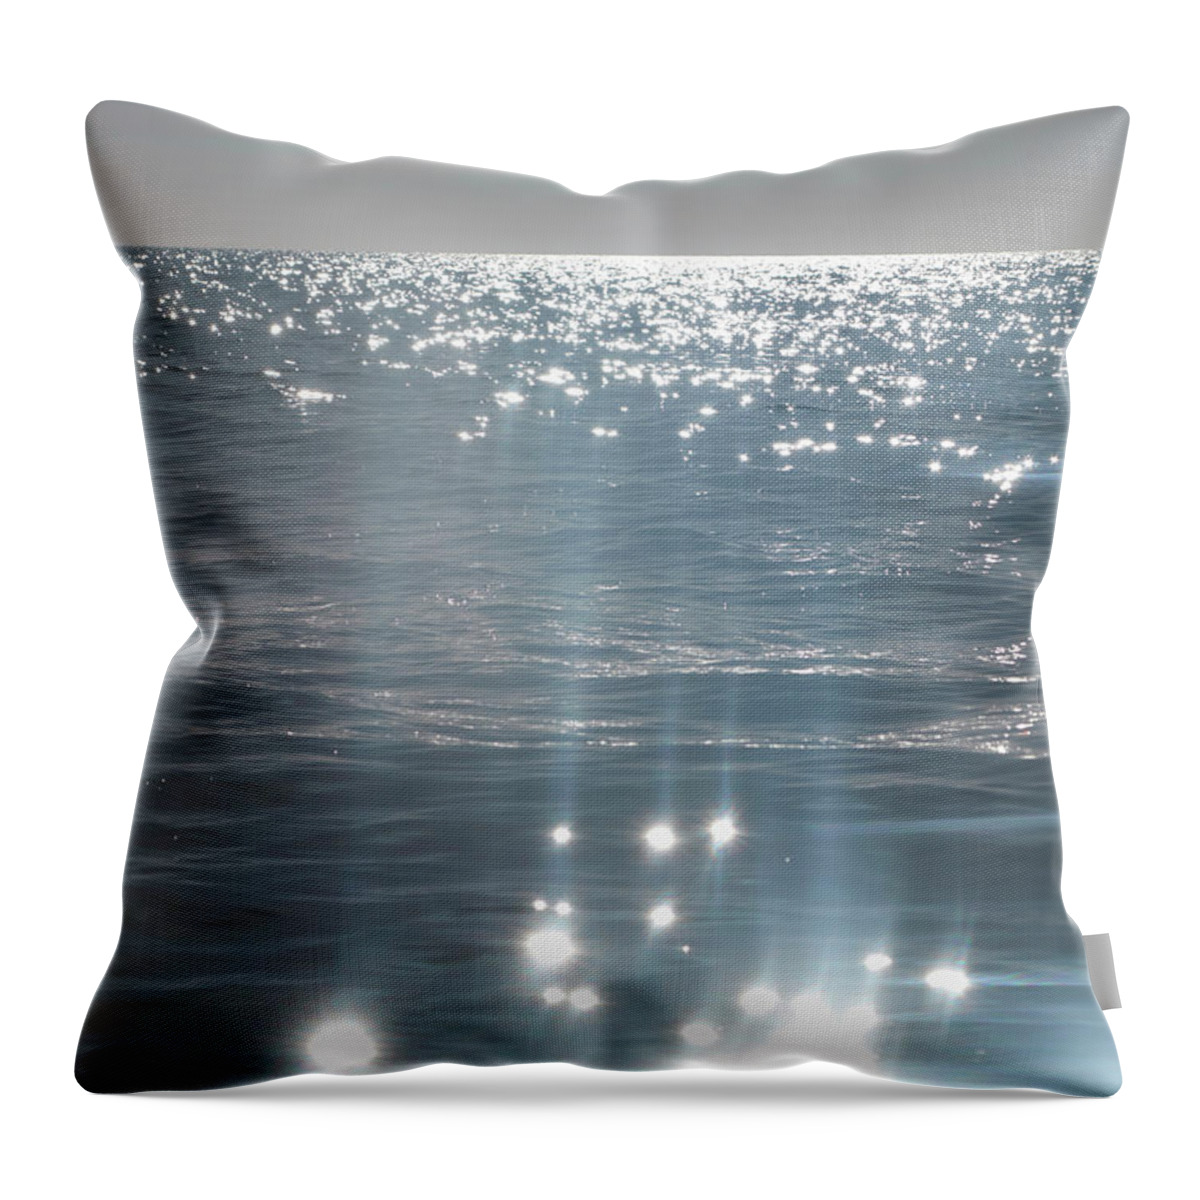 Scenics Throw Pillow featuring the photograph View Out To Sea Across Atlantic Ocean by Dougal Waters